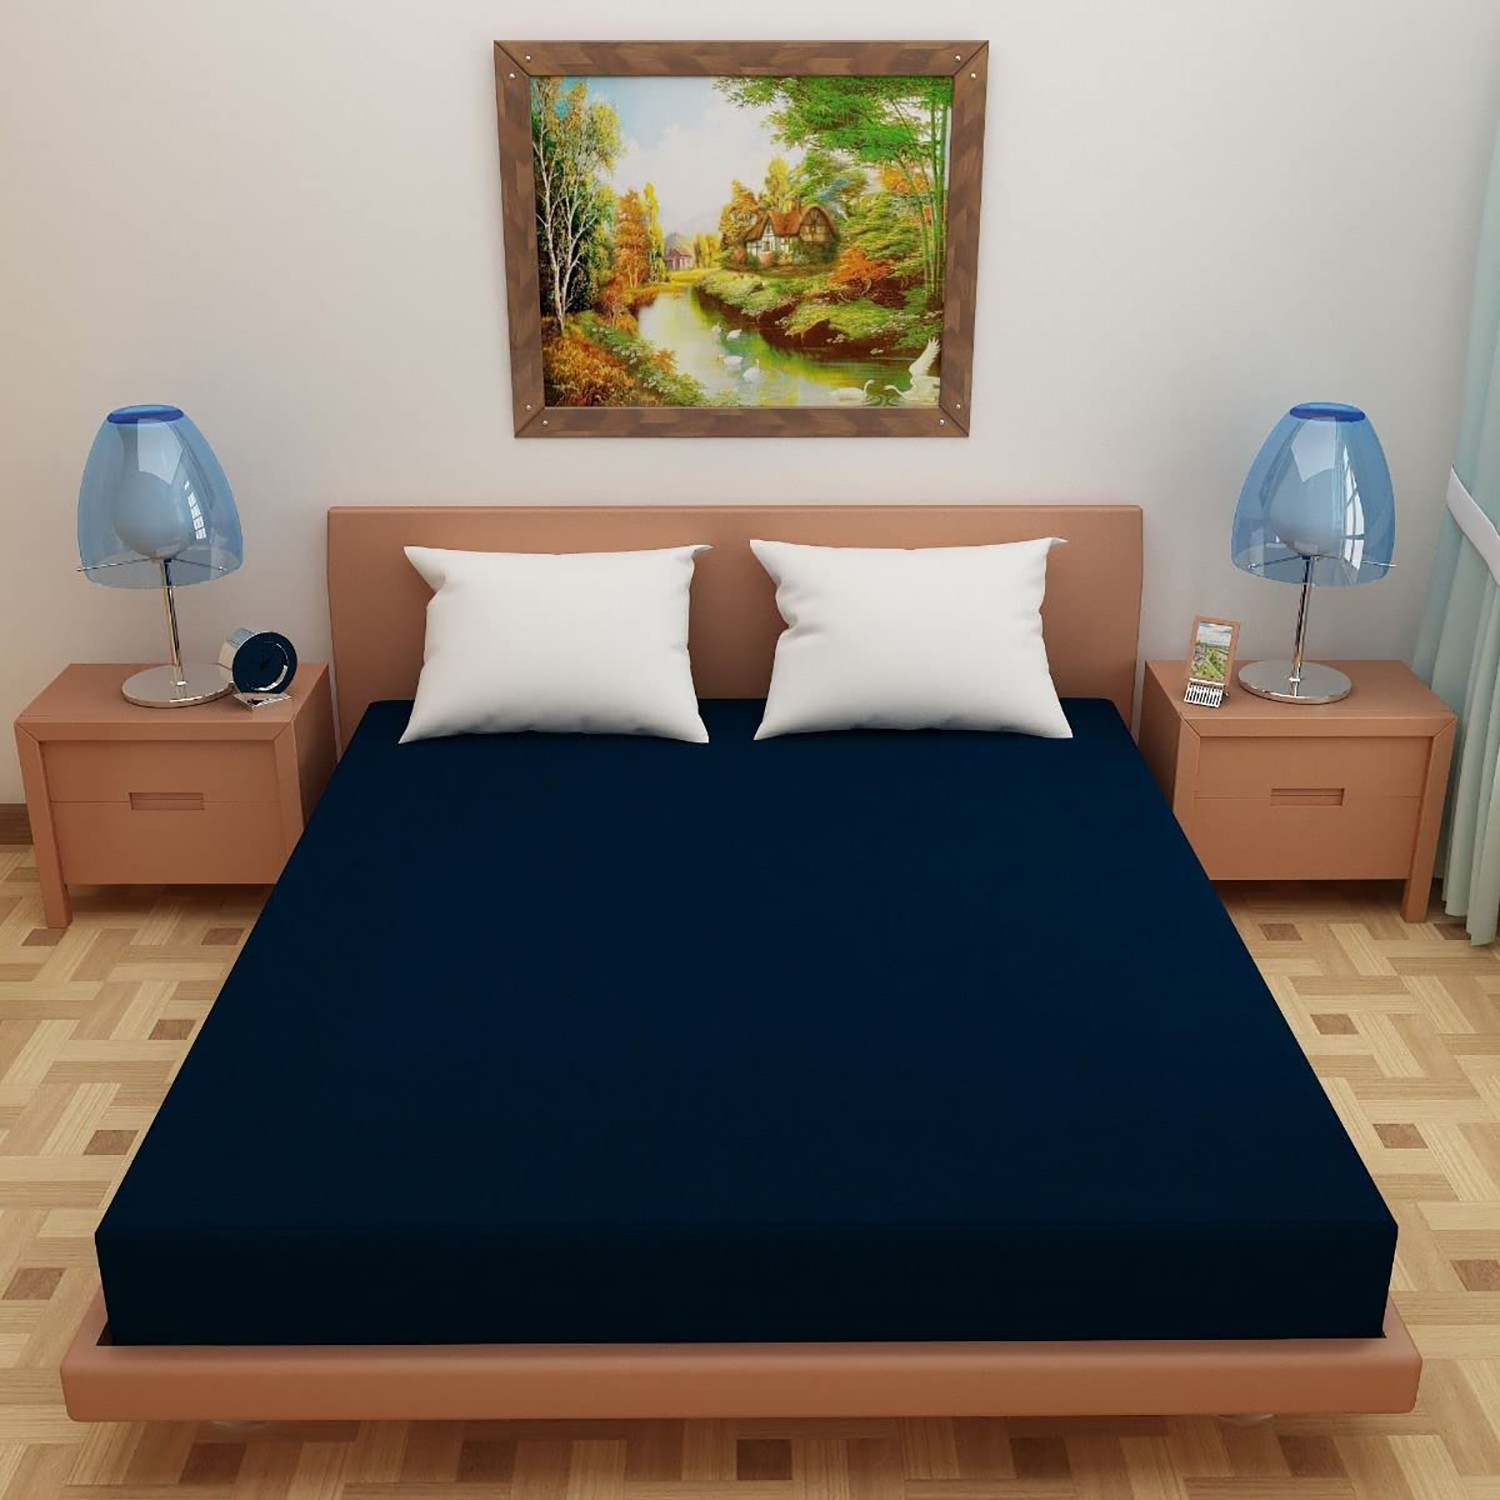 Kuber Industries Waterproof Double Bed Mattress Cover|Breathable Terry Cotton Surface & Elastic Fitted Mattress Protector,6 x 6.5 Ft. (Dark Blue)